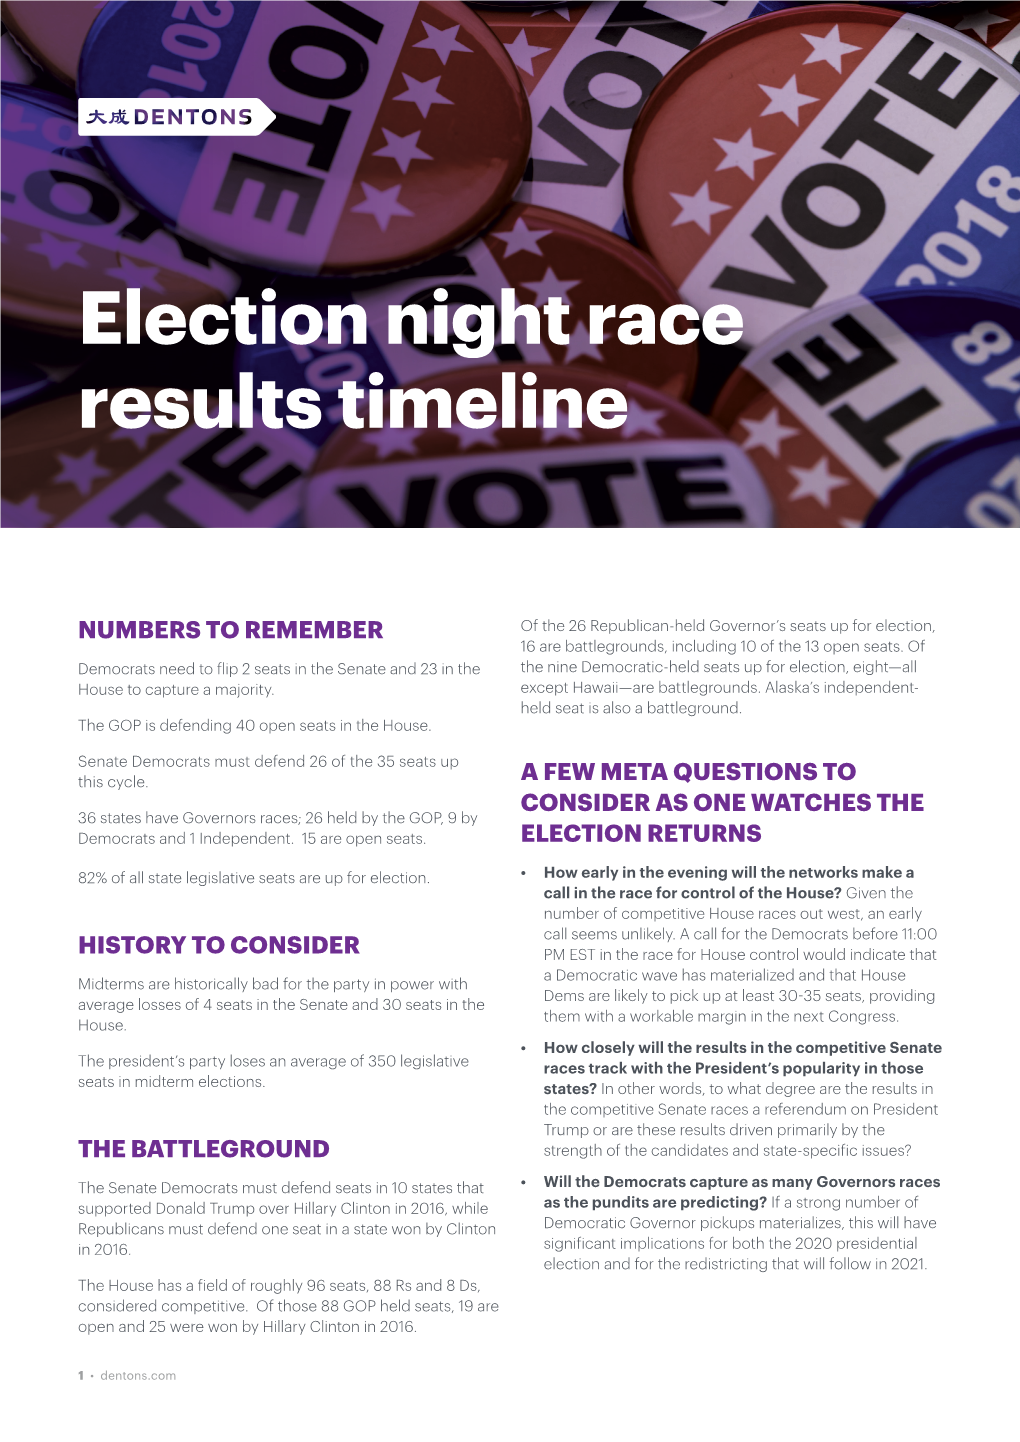 Election Night Race Results Timeline